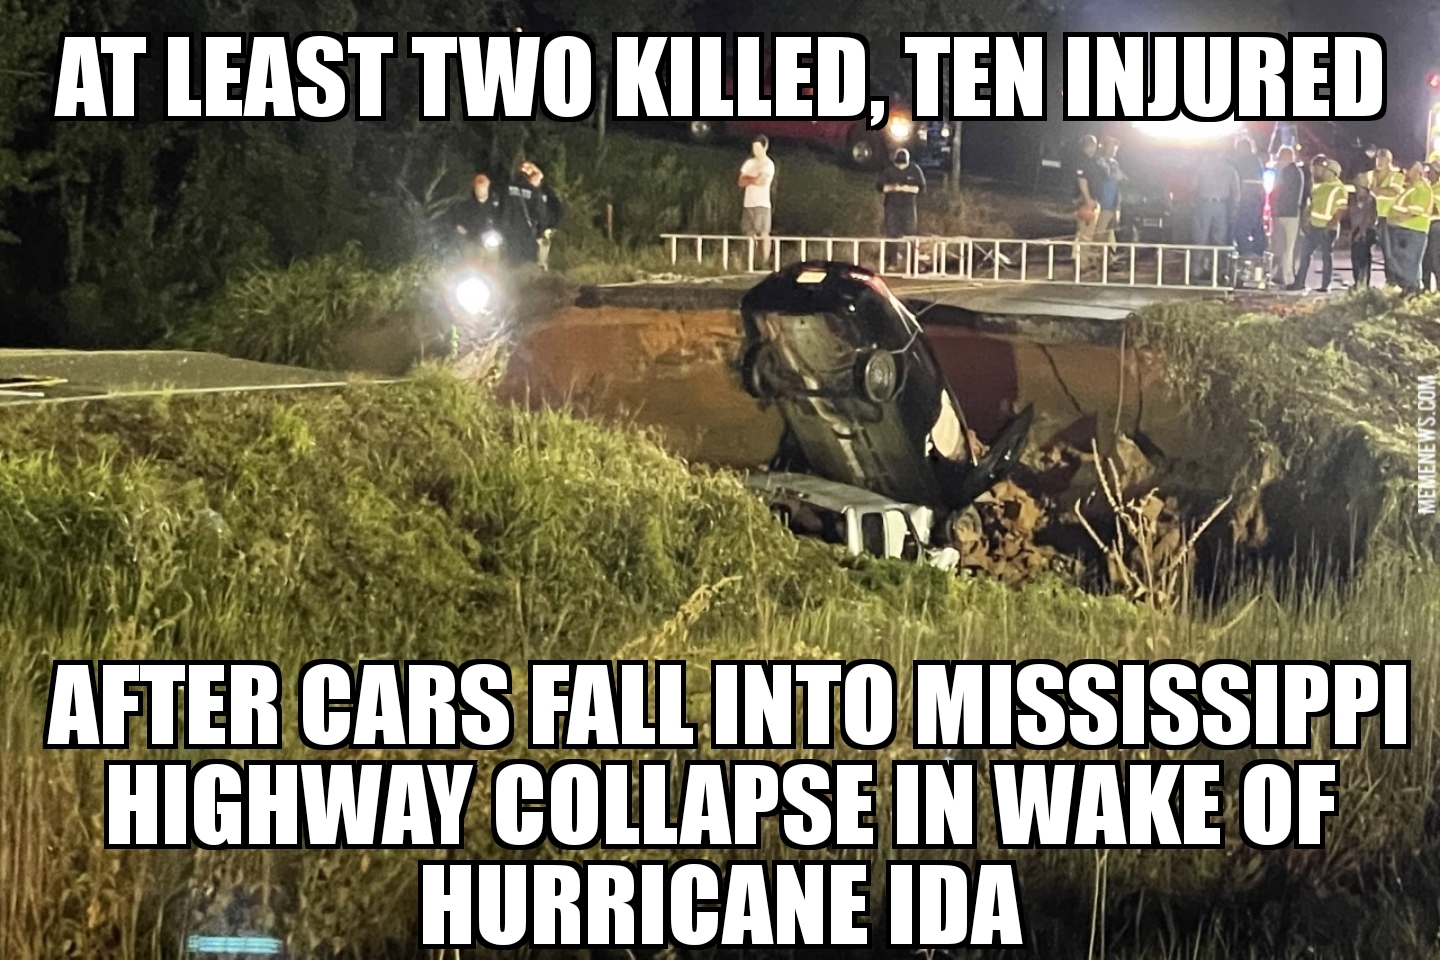 Mississippi highway collapse